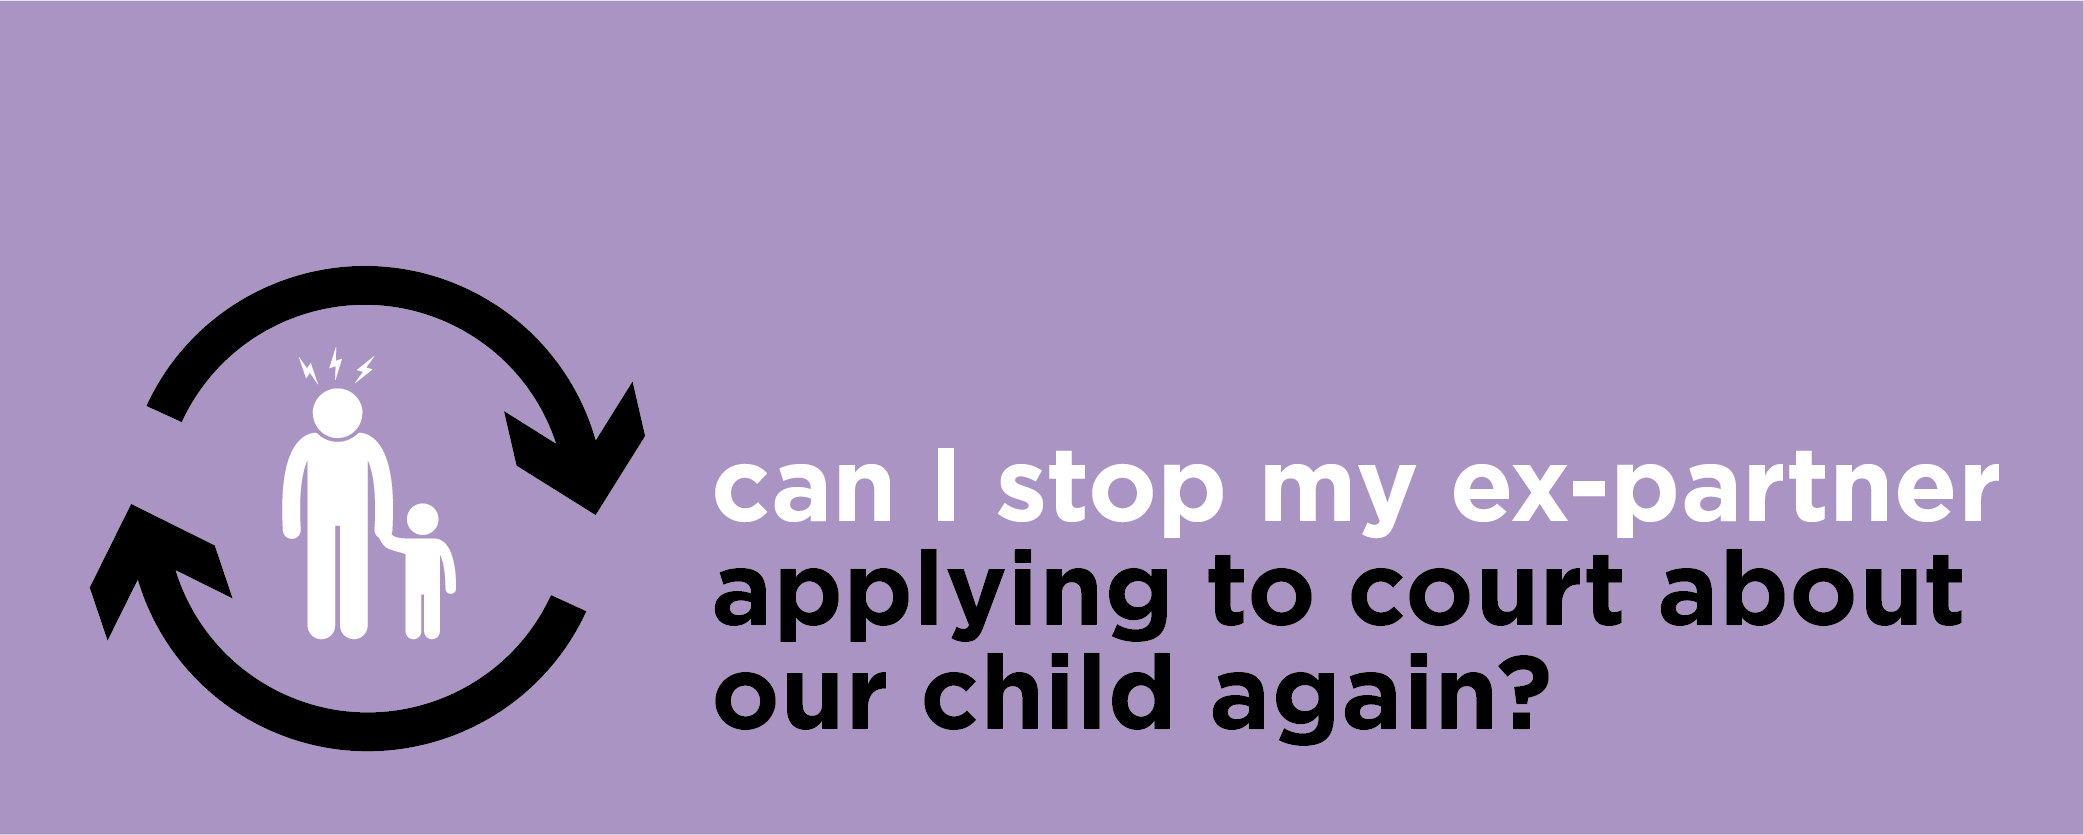 Can I stop my ex-partner applying to court about our child again?